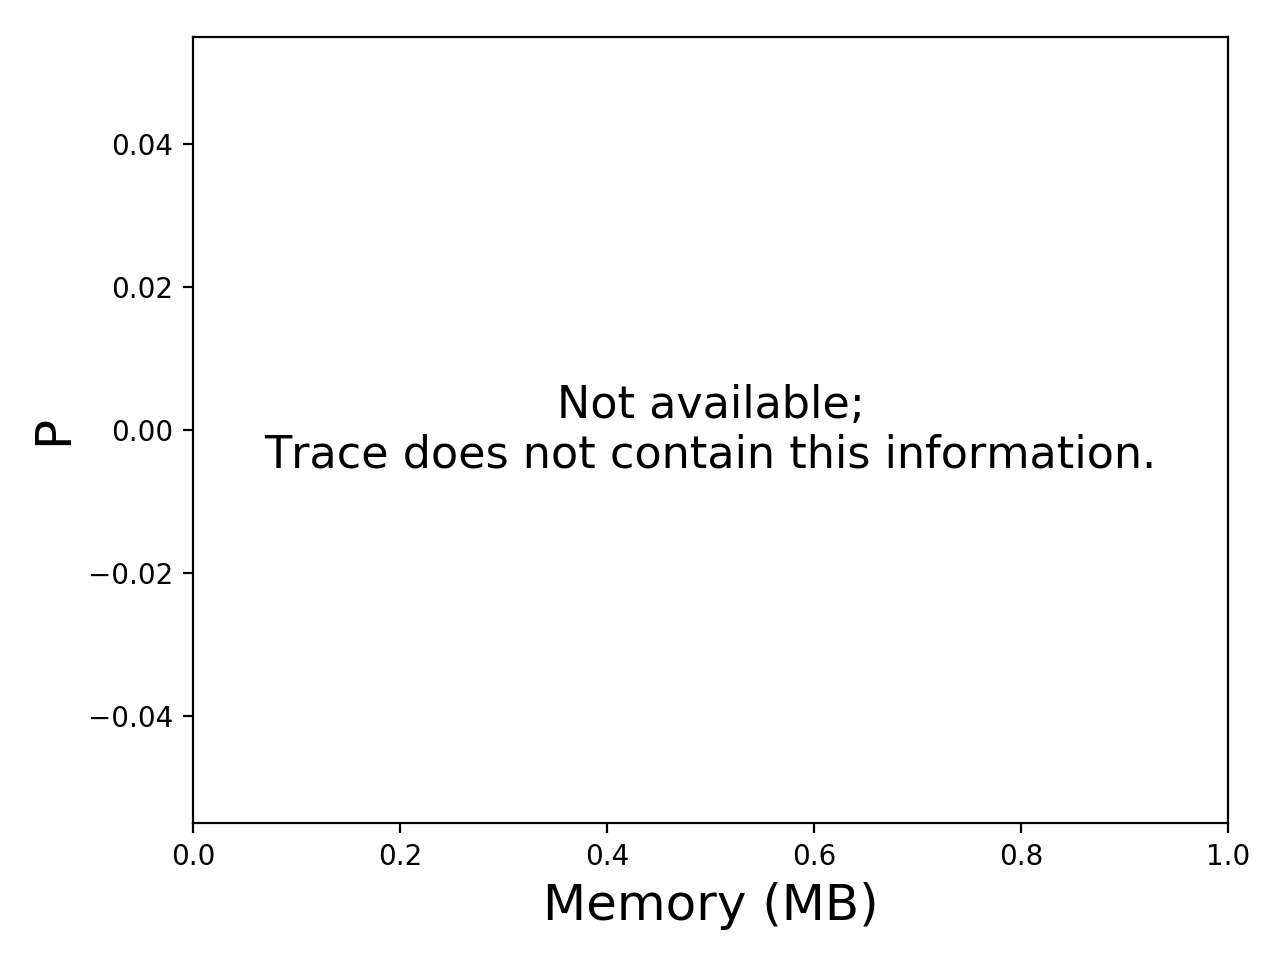 Task memory consumption graph for the Pegasus_P2 trace.